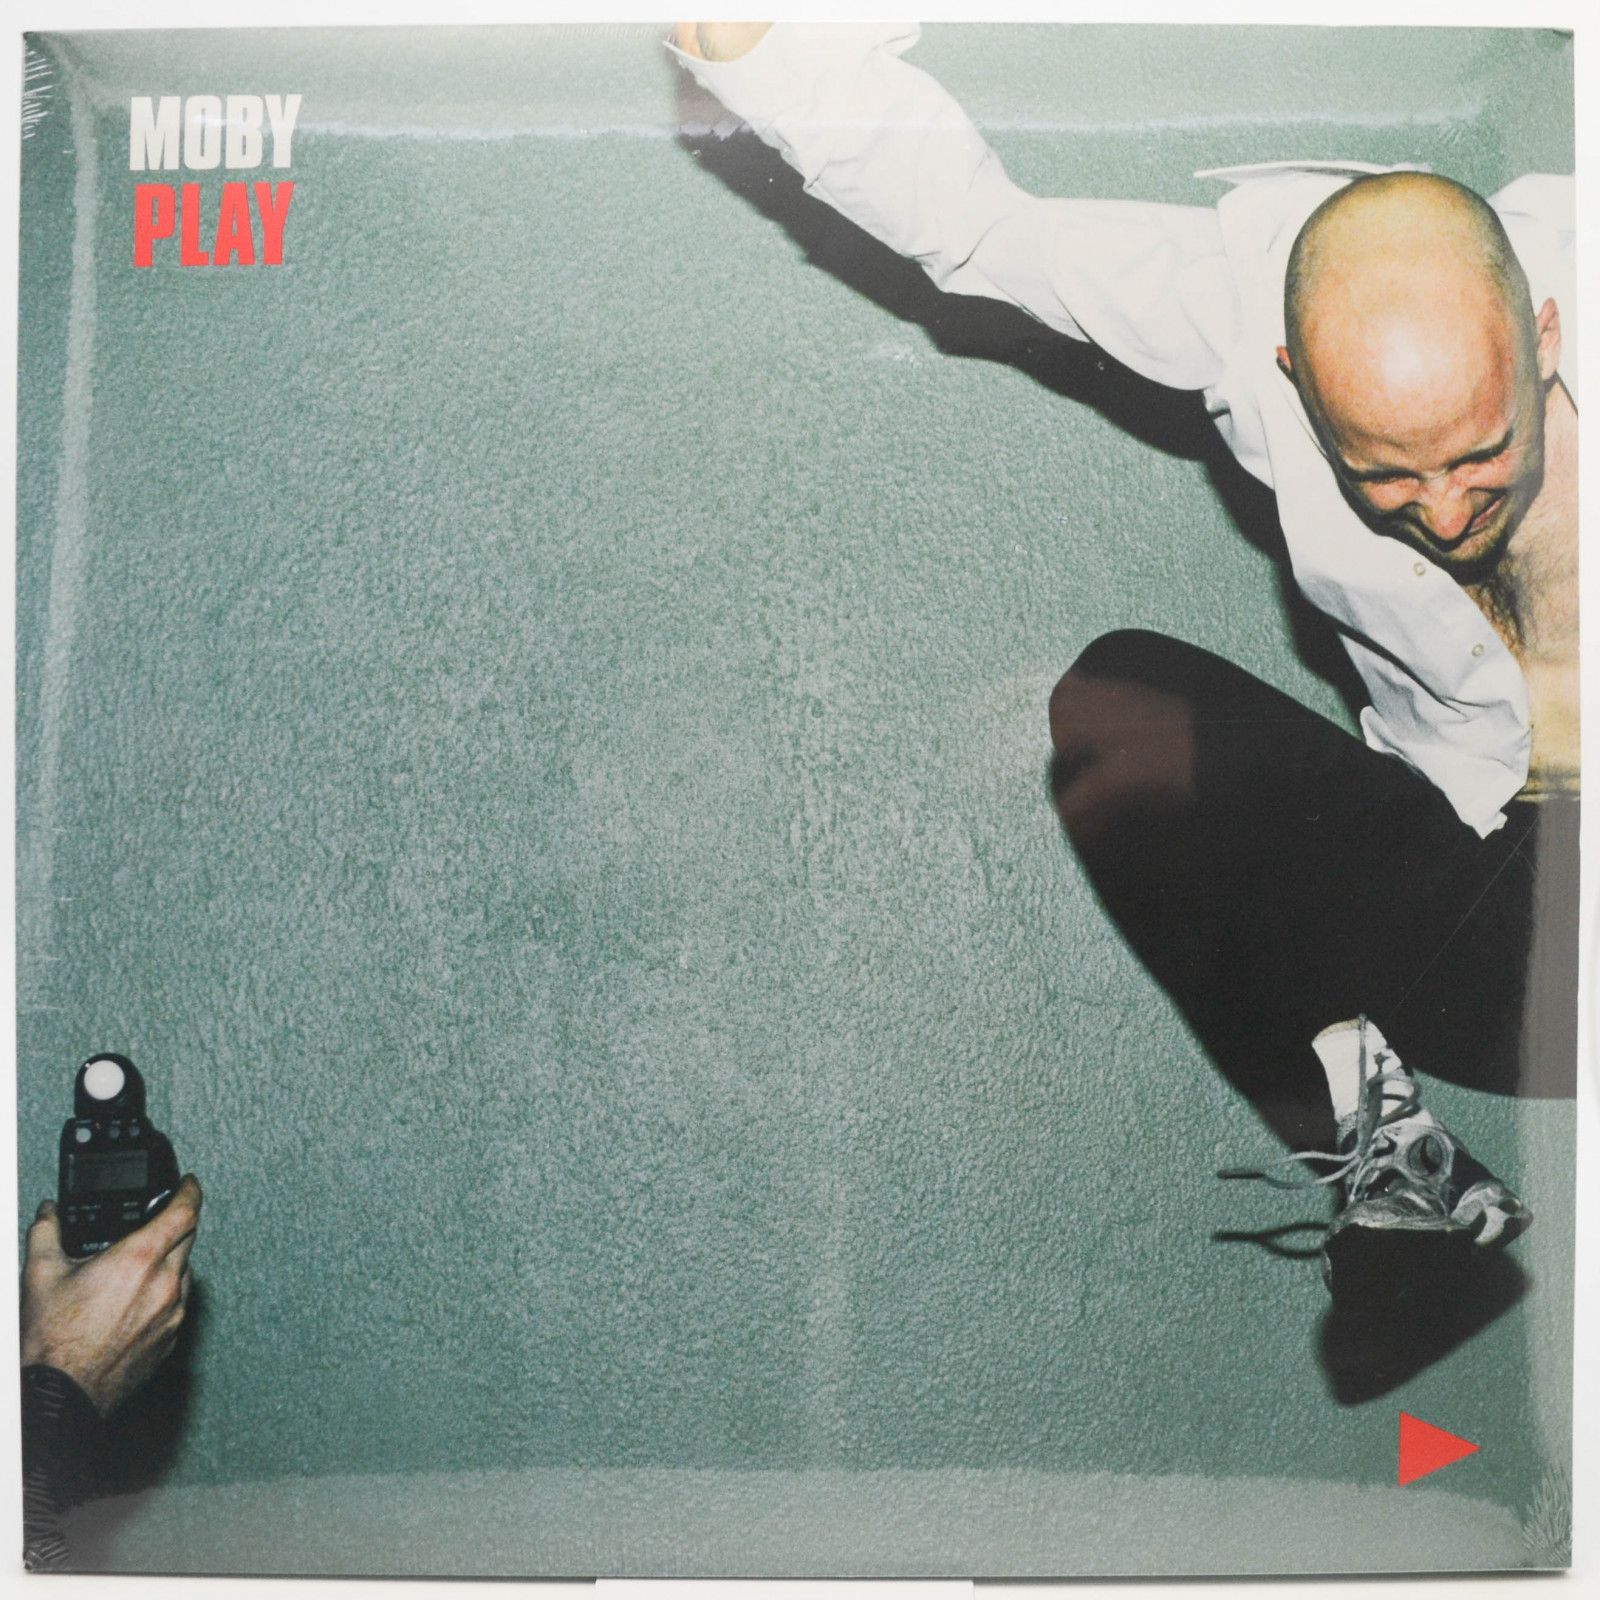 Moby — Play (2LP), 1999